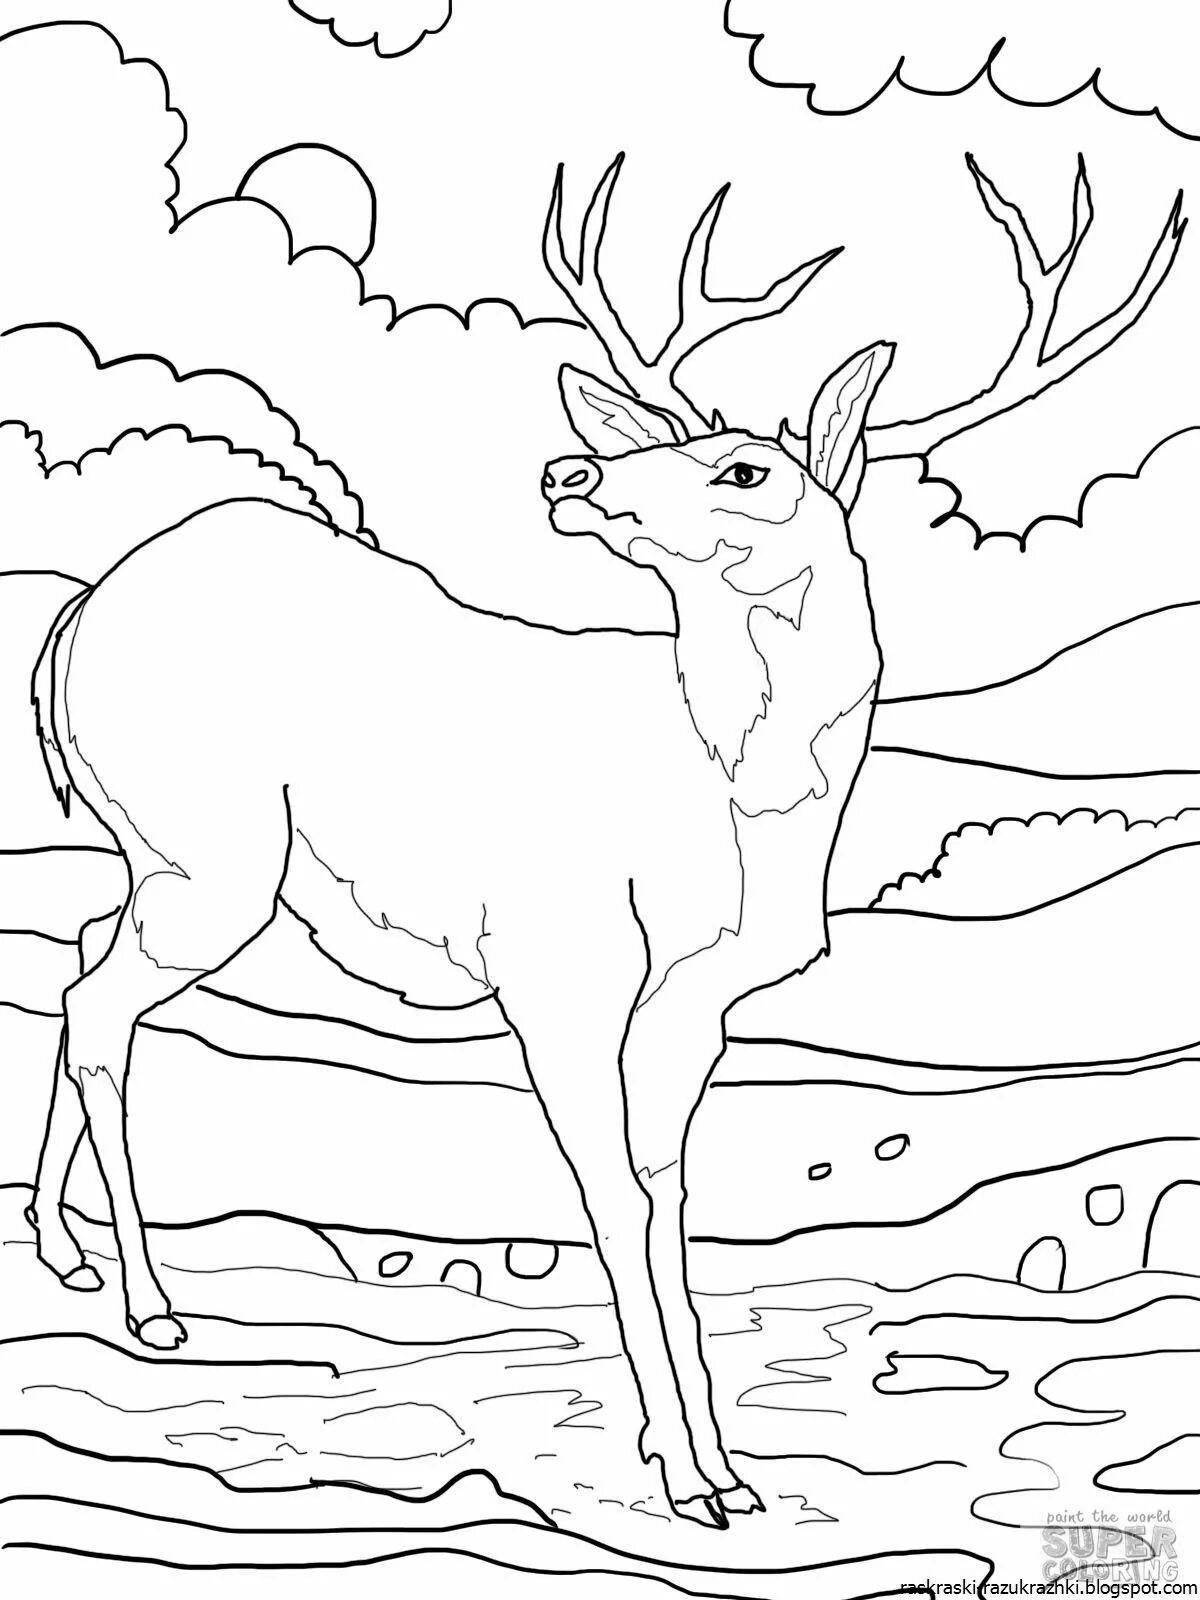 Shiny deer coloring page